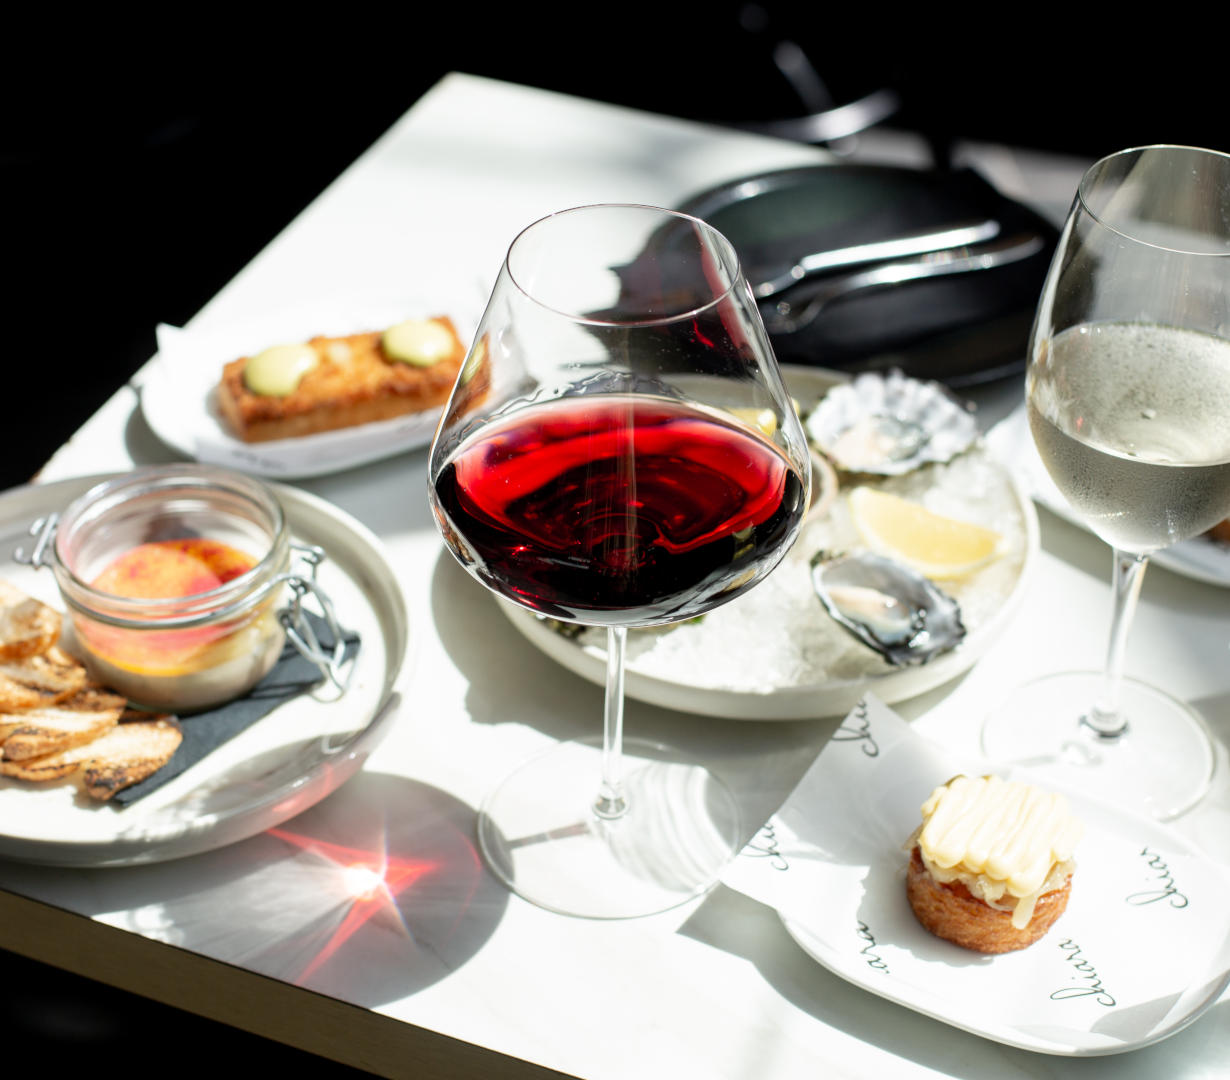 An assortment of small Spanish sharing plates and drinks arranged on a table with a narrow depth of field.